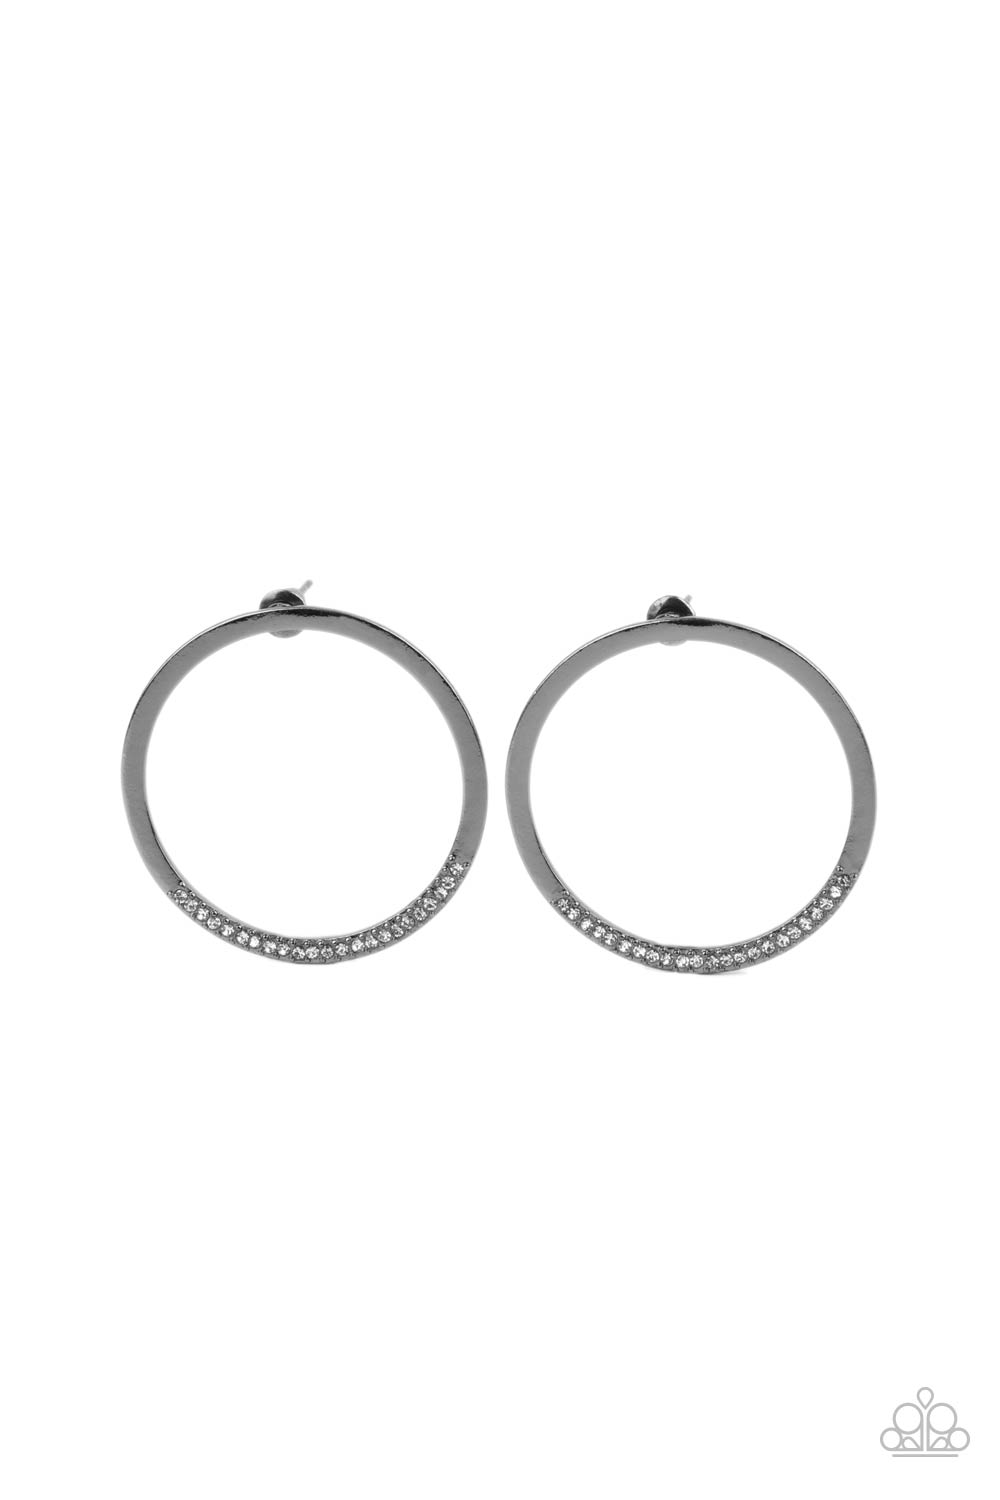 Spot On Opulence Black Post Earring - Paparazzi Accessories  As if dipped in glitter, the bottom of a flat gunmetal hoop is encrusted in dainty white rhinestones for a classic shimmer. Earring attaches to a standard post fitting.  All Paparazzi Accessories are lead free and nickel free!  Sold as one pair of post earrings.